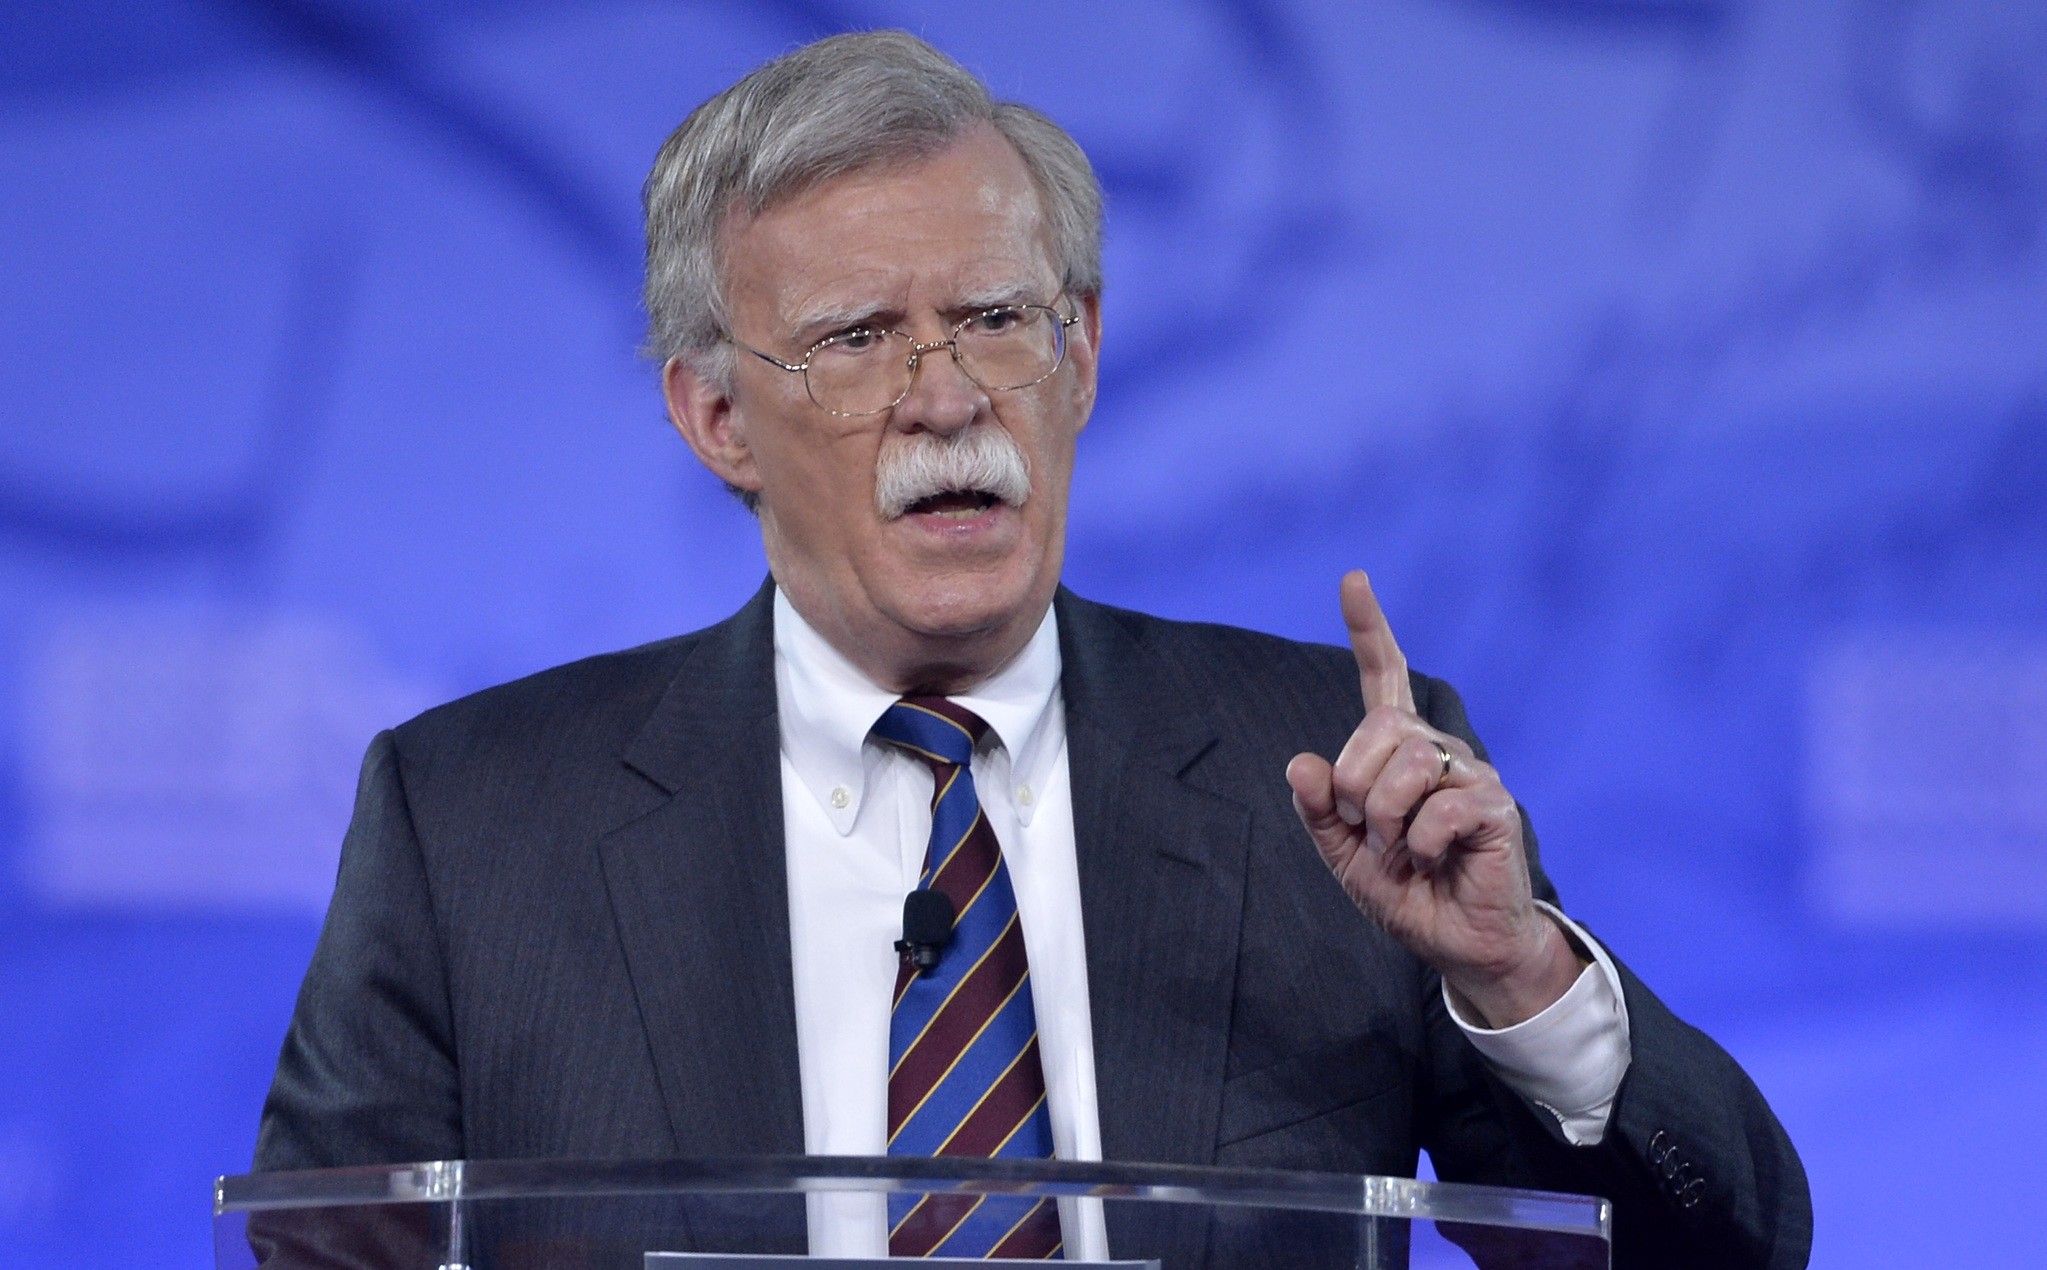 This file photo taken on February 24, 2017 shows former US Ambassador to the UN John Bolton speaking to the Conservative Political Action Conference (CPAC) at National Harbor, Maryland. (AFP Photo)